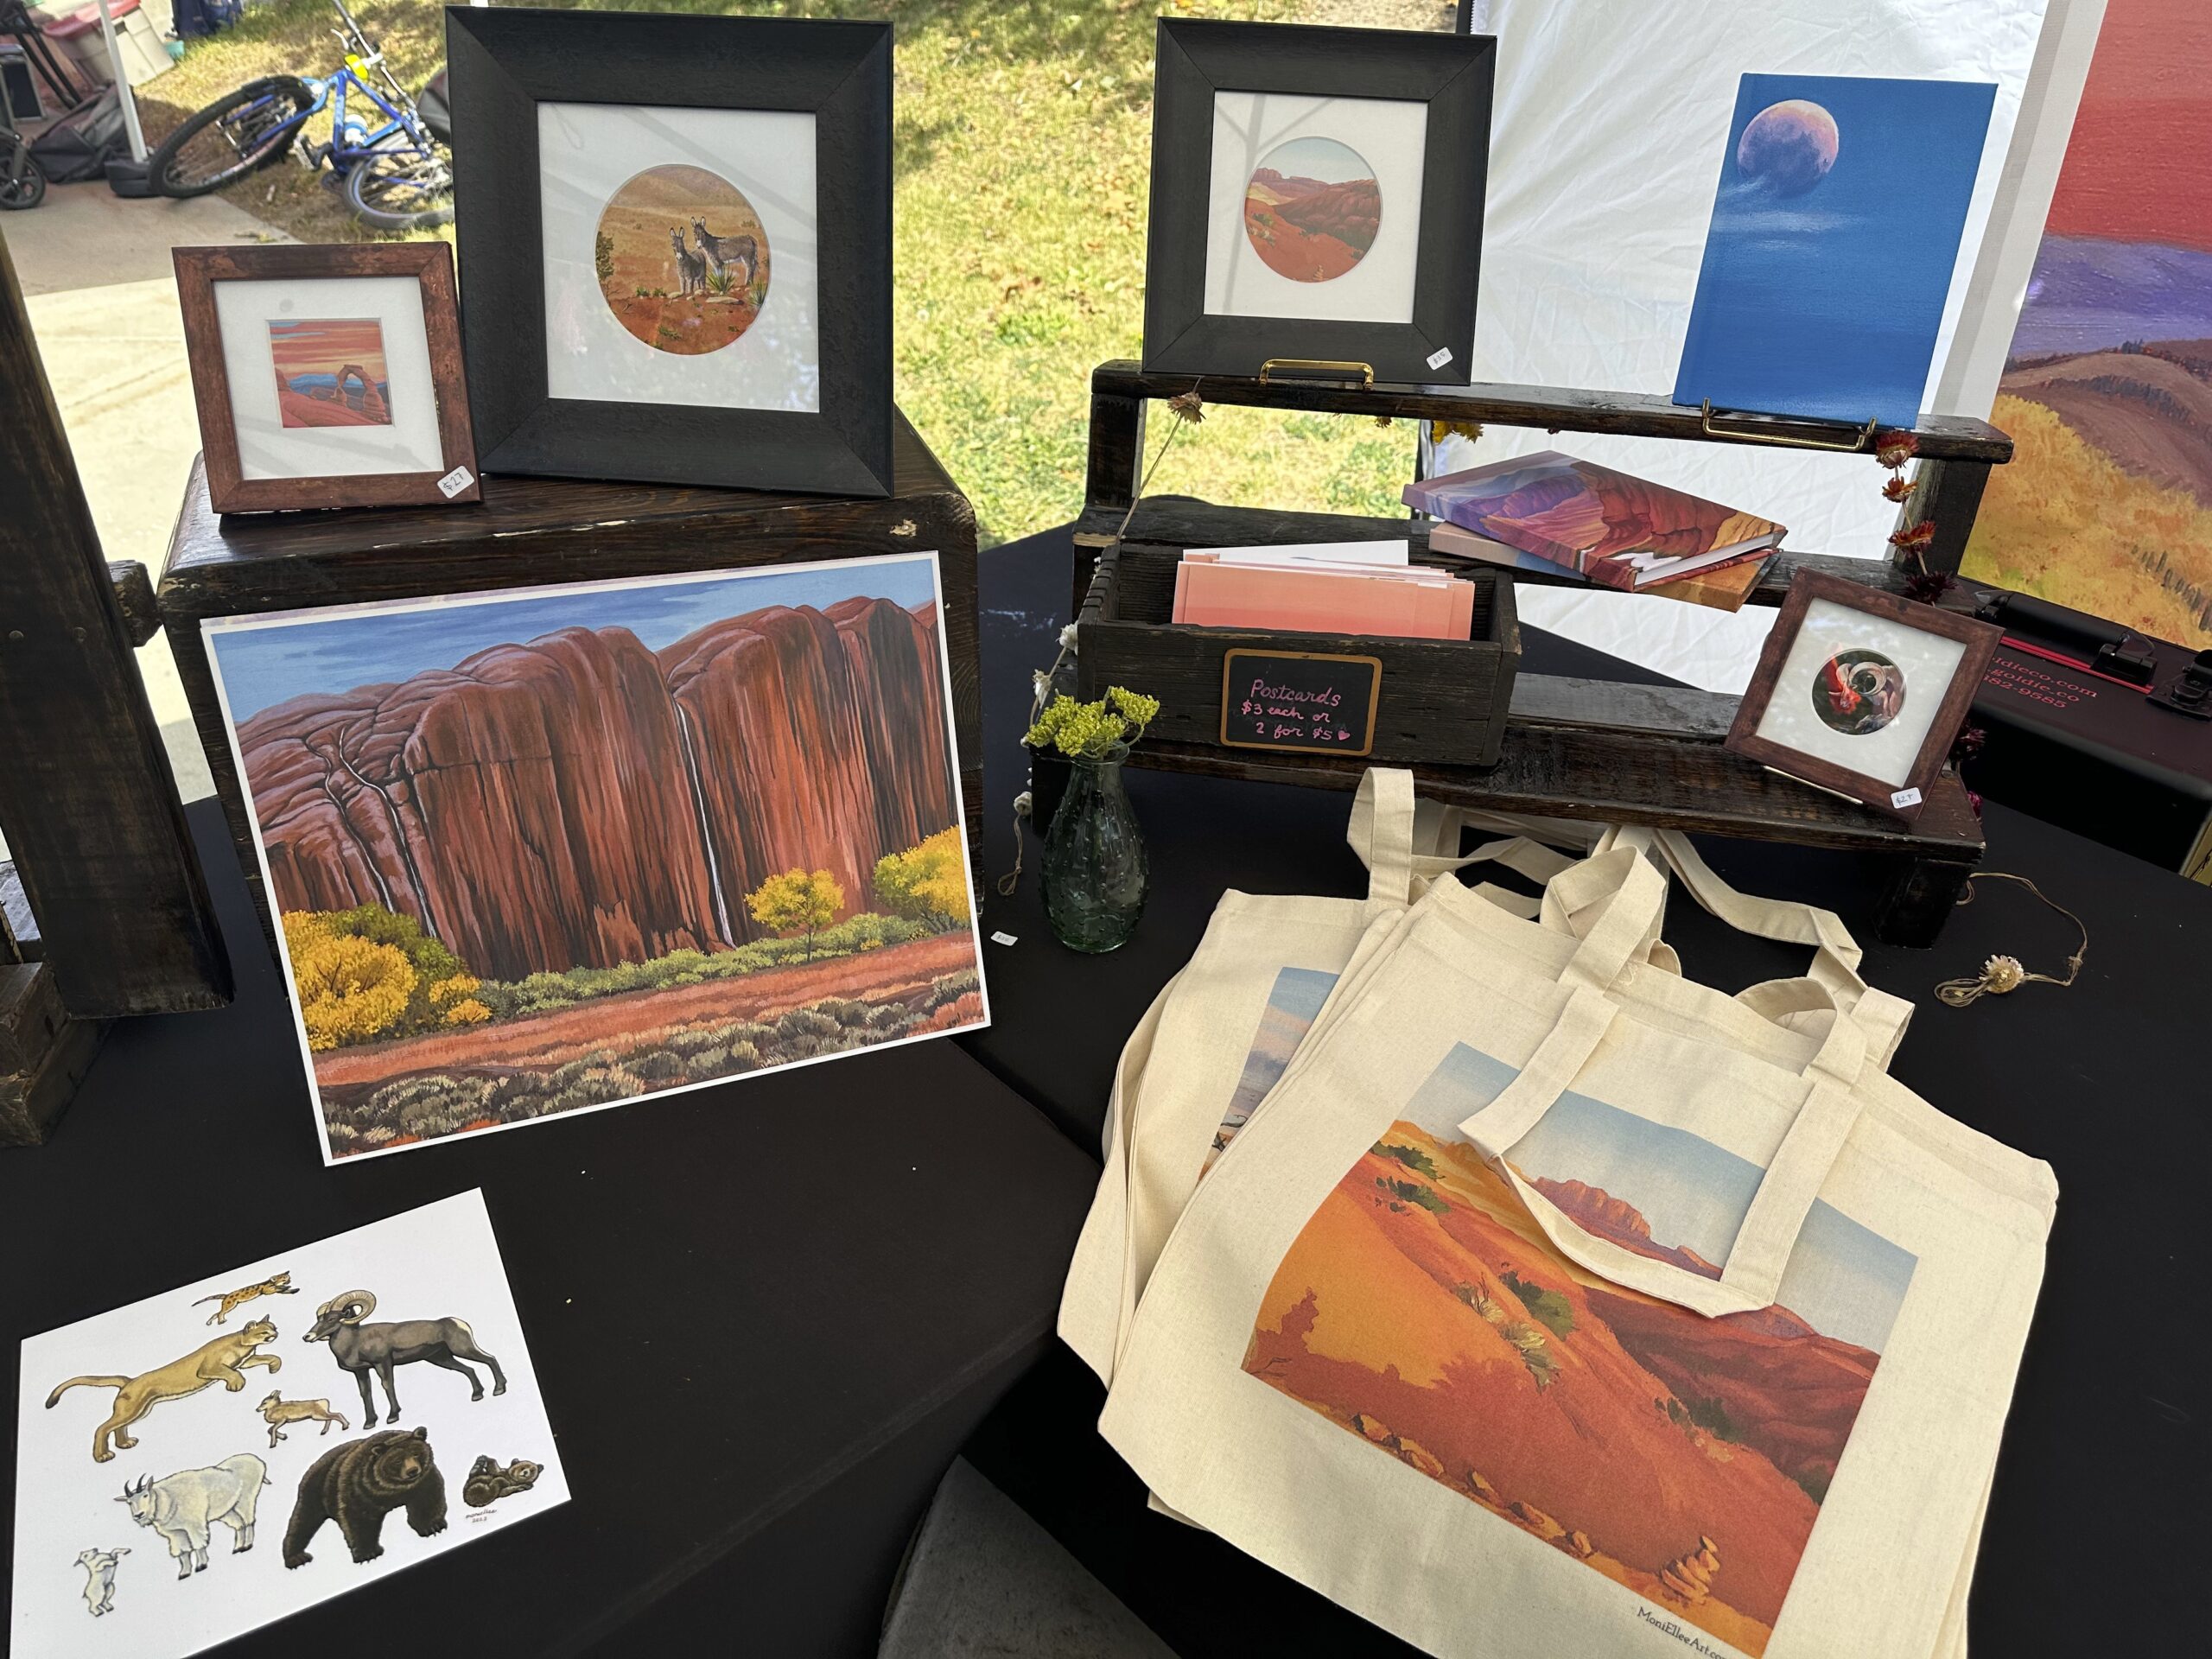 Photo of artwork at farmers market, a painted tote bag, framed oil paintings of deserts small and large, and painted journals.